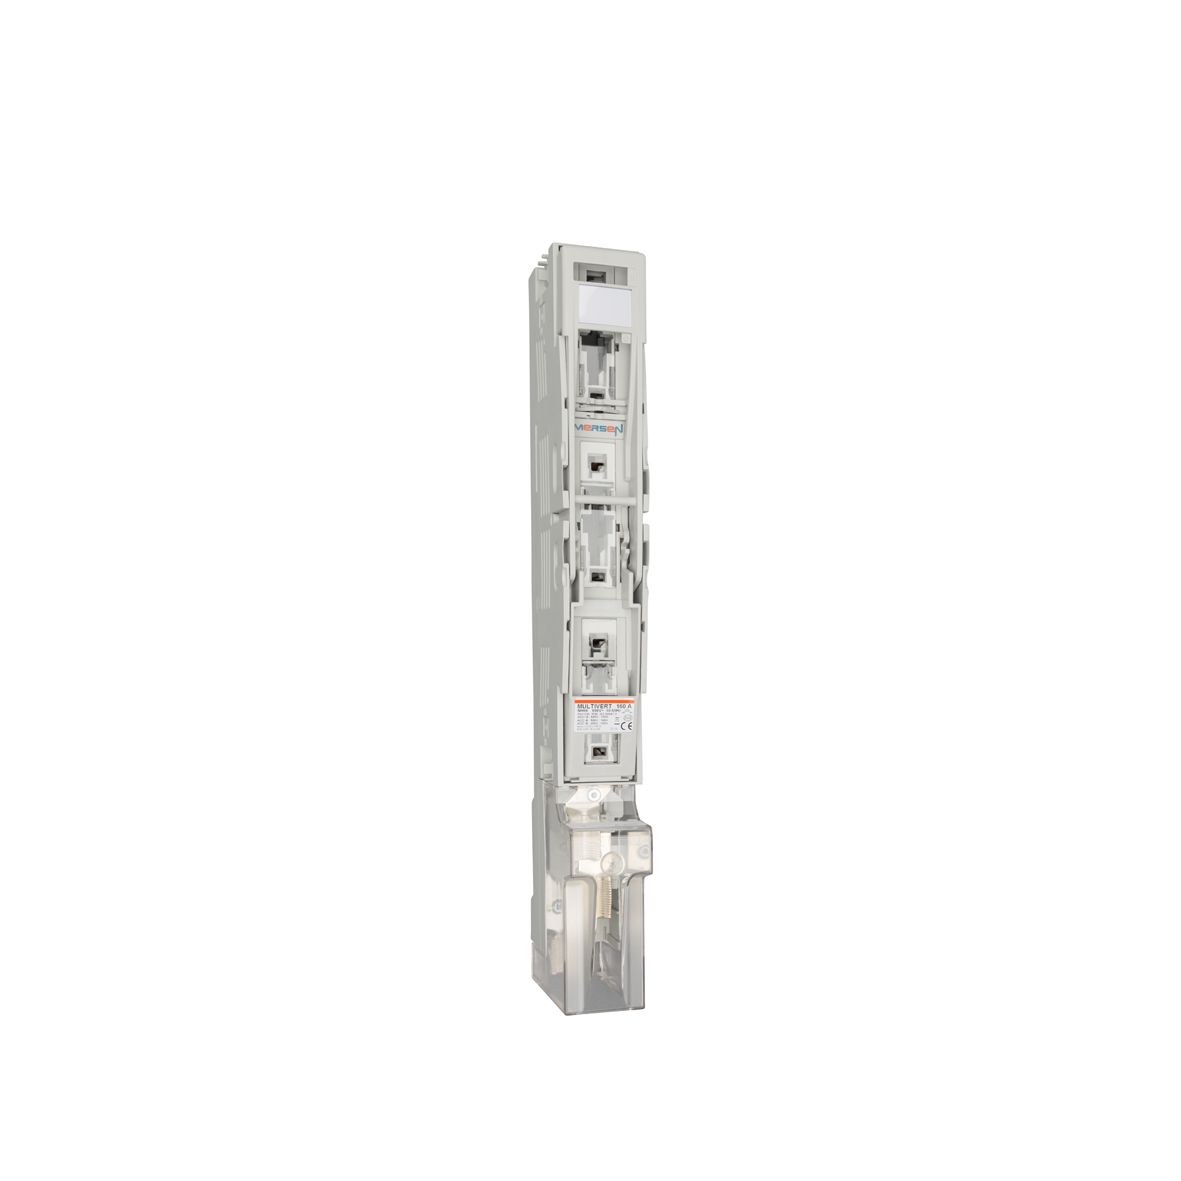 A1023132 - MULTIVERT 160A/100mm, 3-pole switching V-terminal